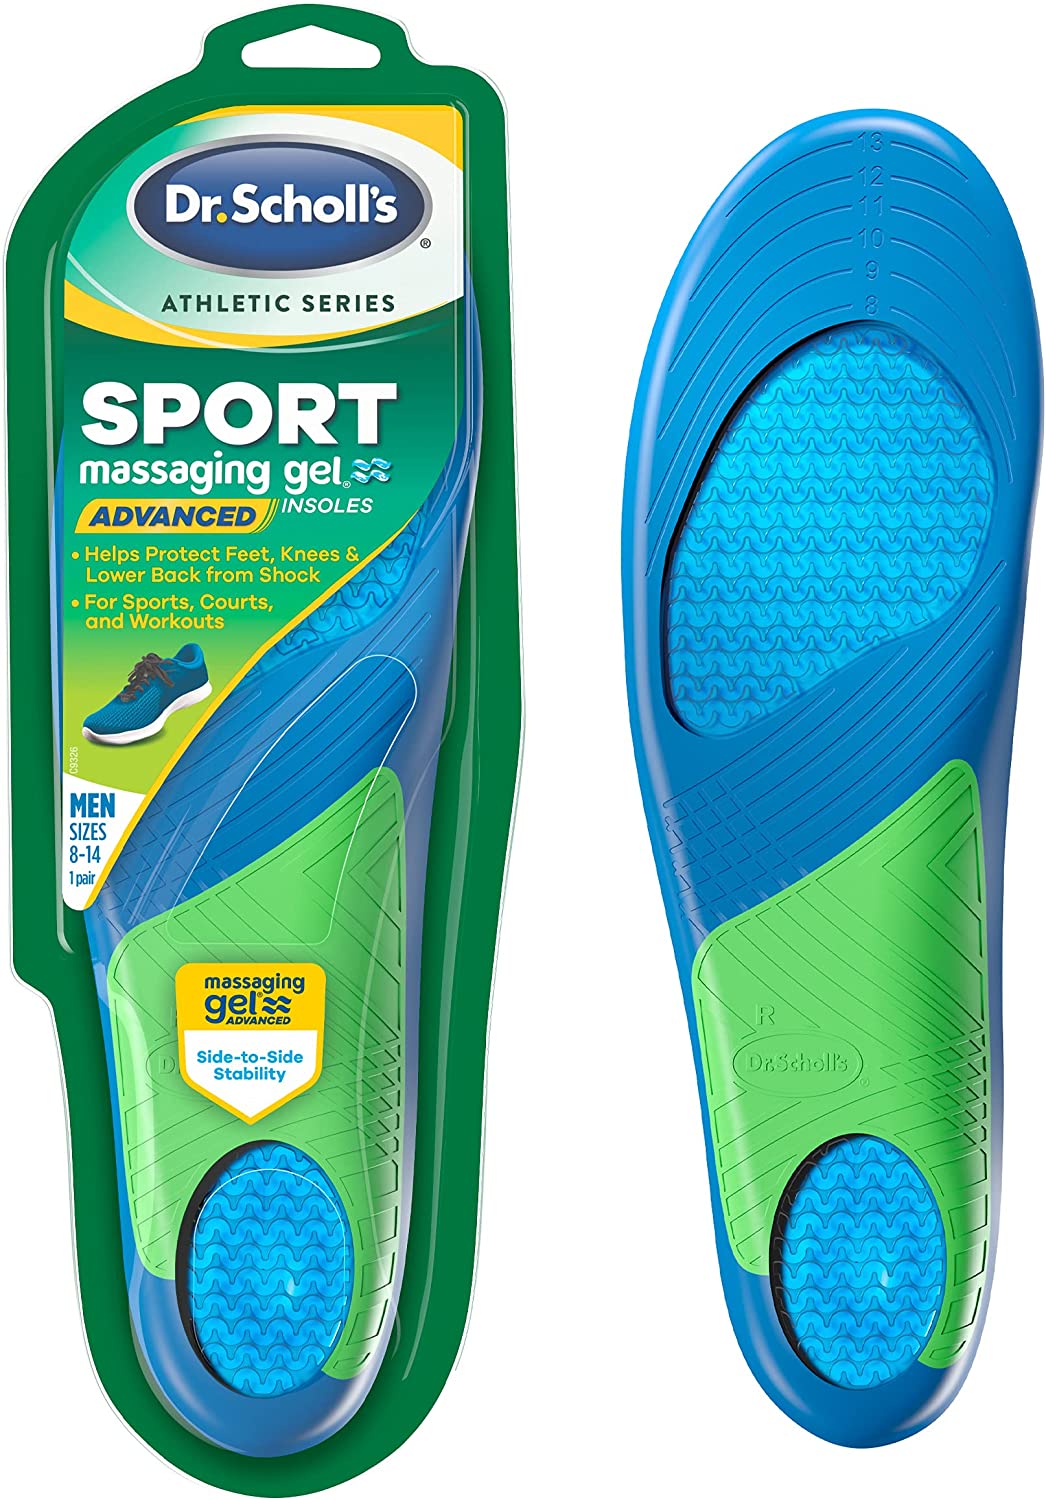 Dr. Scholl's All-Purpose Sport & Fitness Comfort Insoles 1 Pair, Trim to Fit